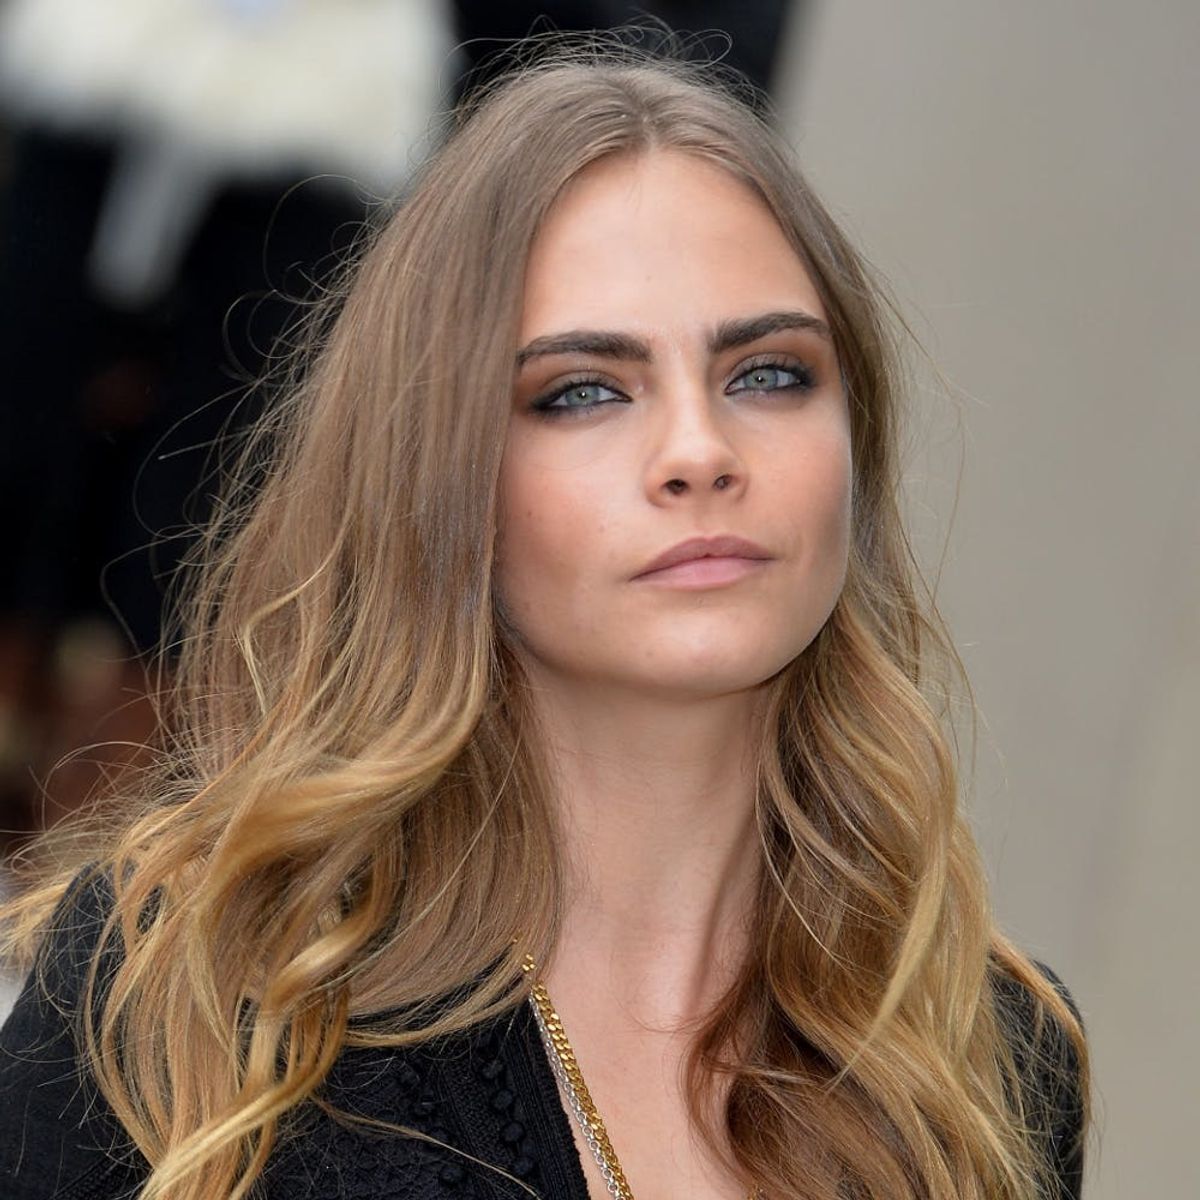 Cara Delevingne Is the Latest Celeb to Chop Off Her Hair